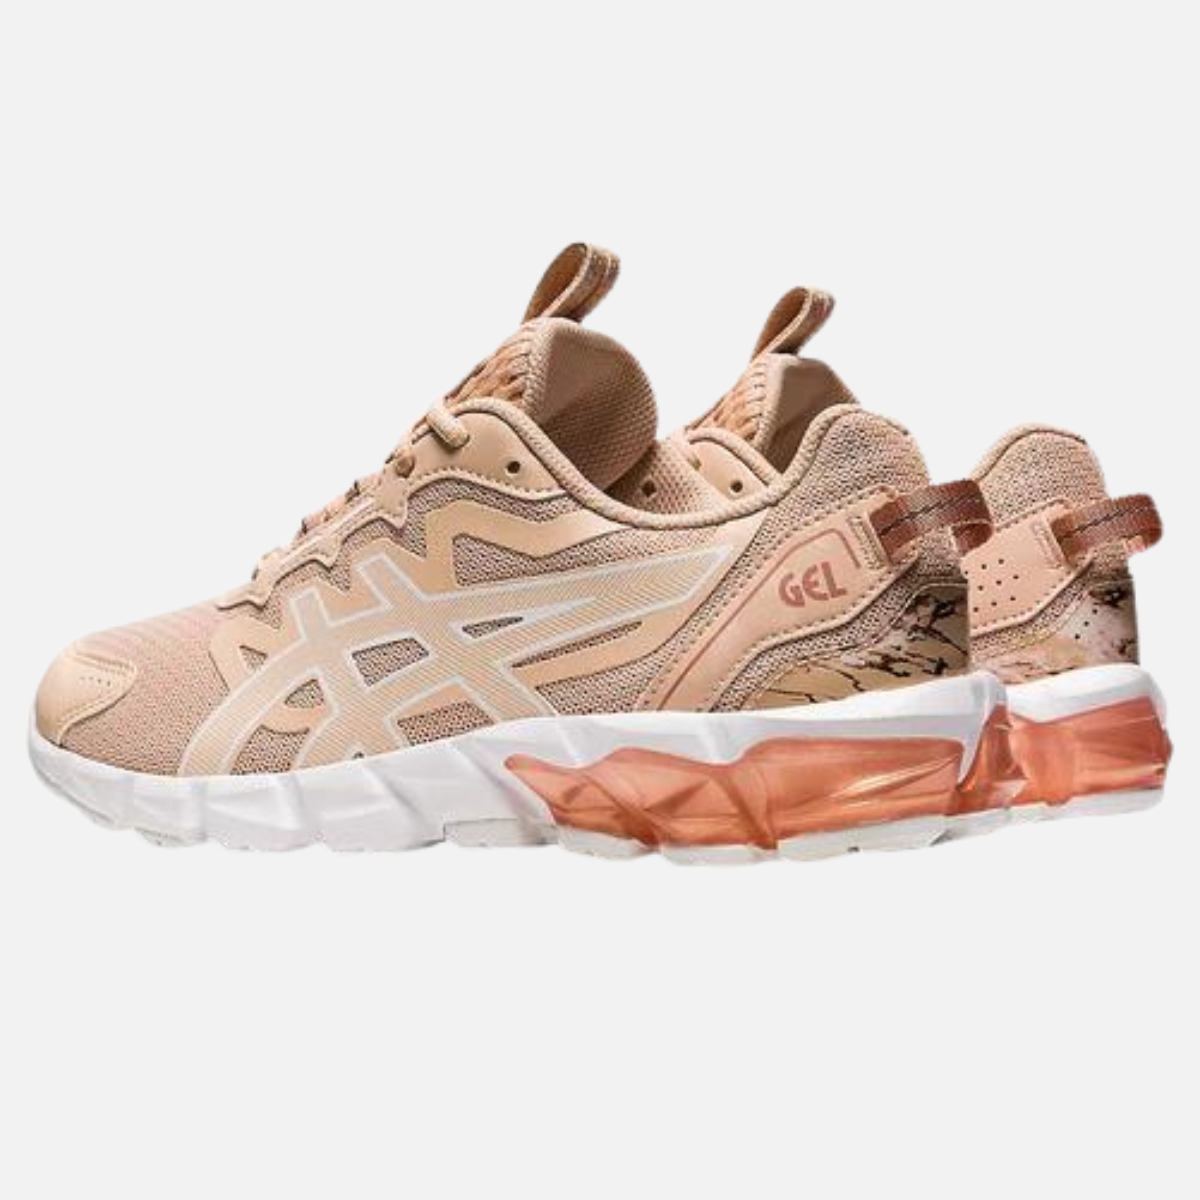 Asics Gel-Quantum 90 (Marble Shine) Womens Sportstyle Shoe-Bisque/Rose Gold